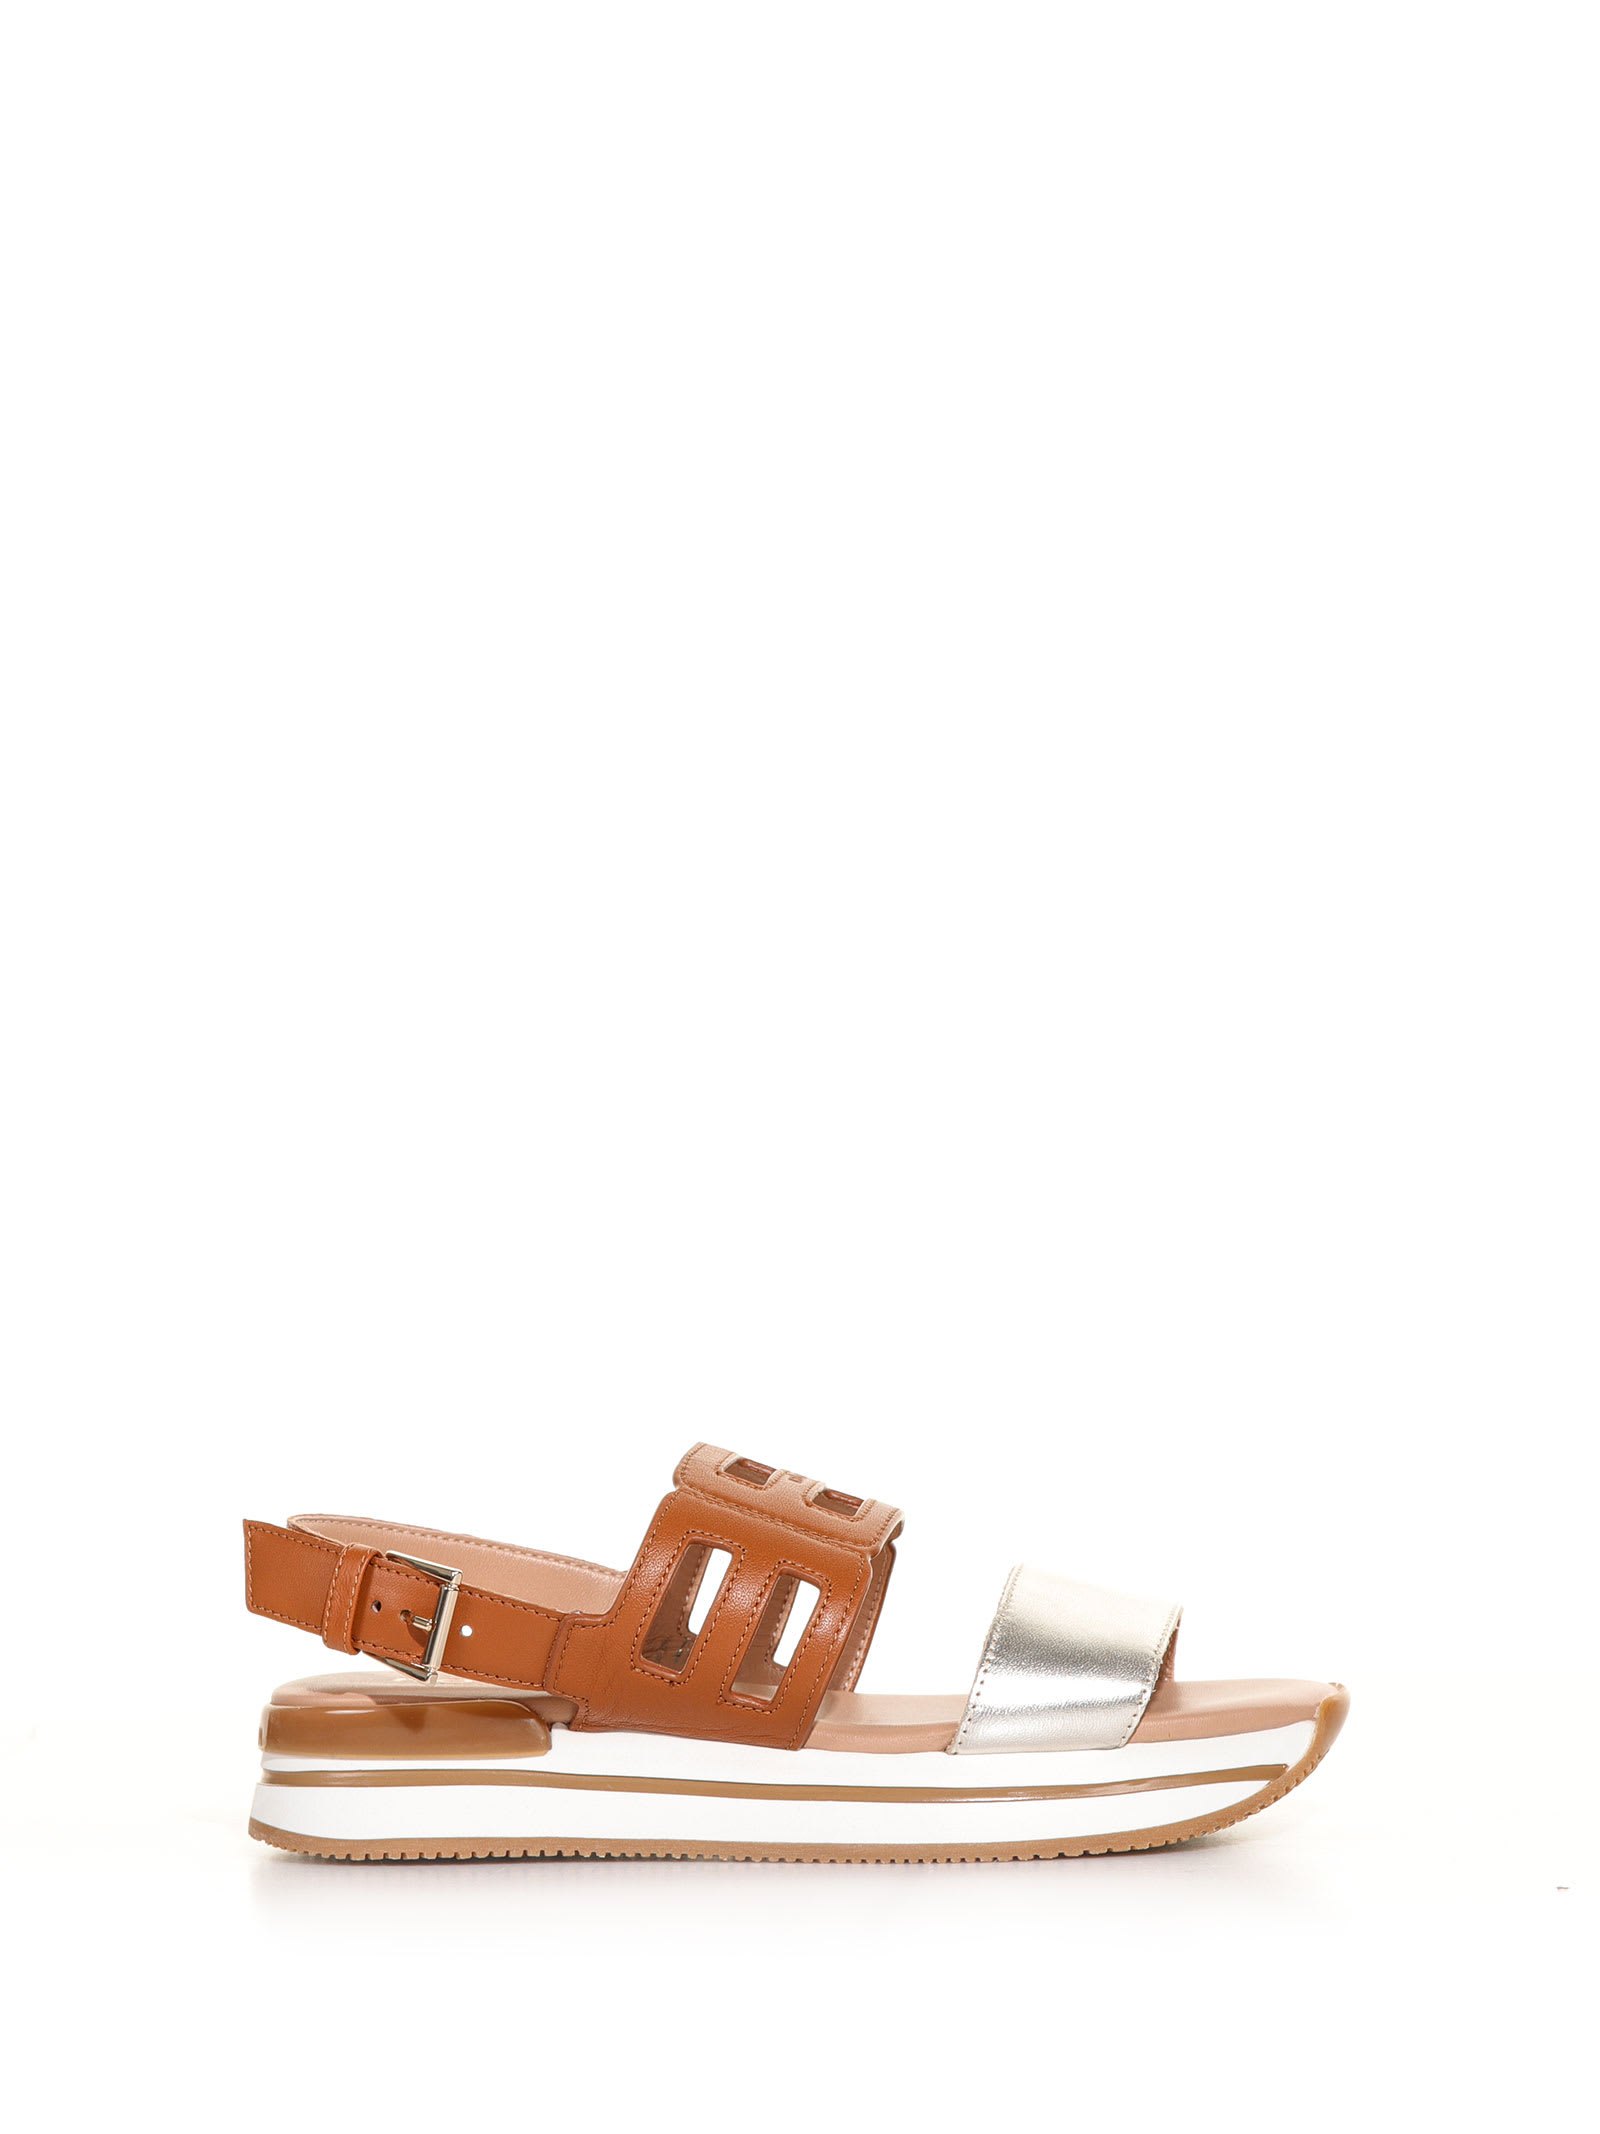 HOGAN H222 SANDAL IN TWO-TONE NAPPA LEATHER